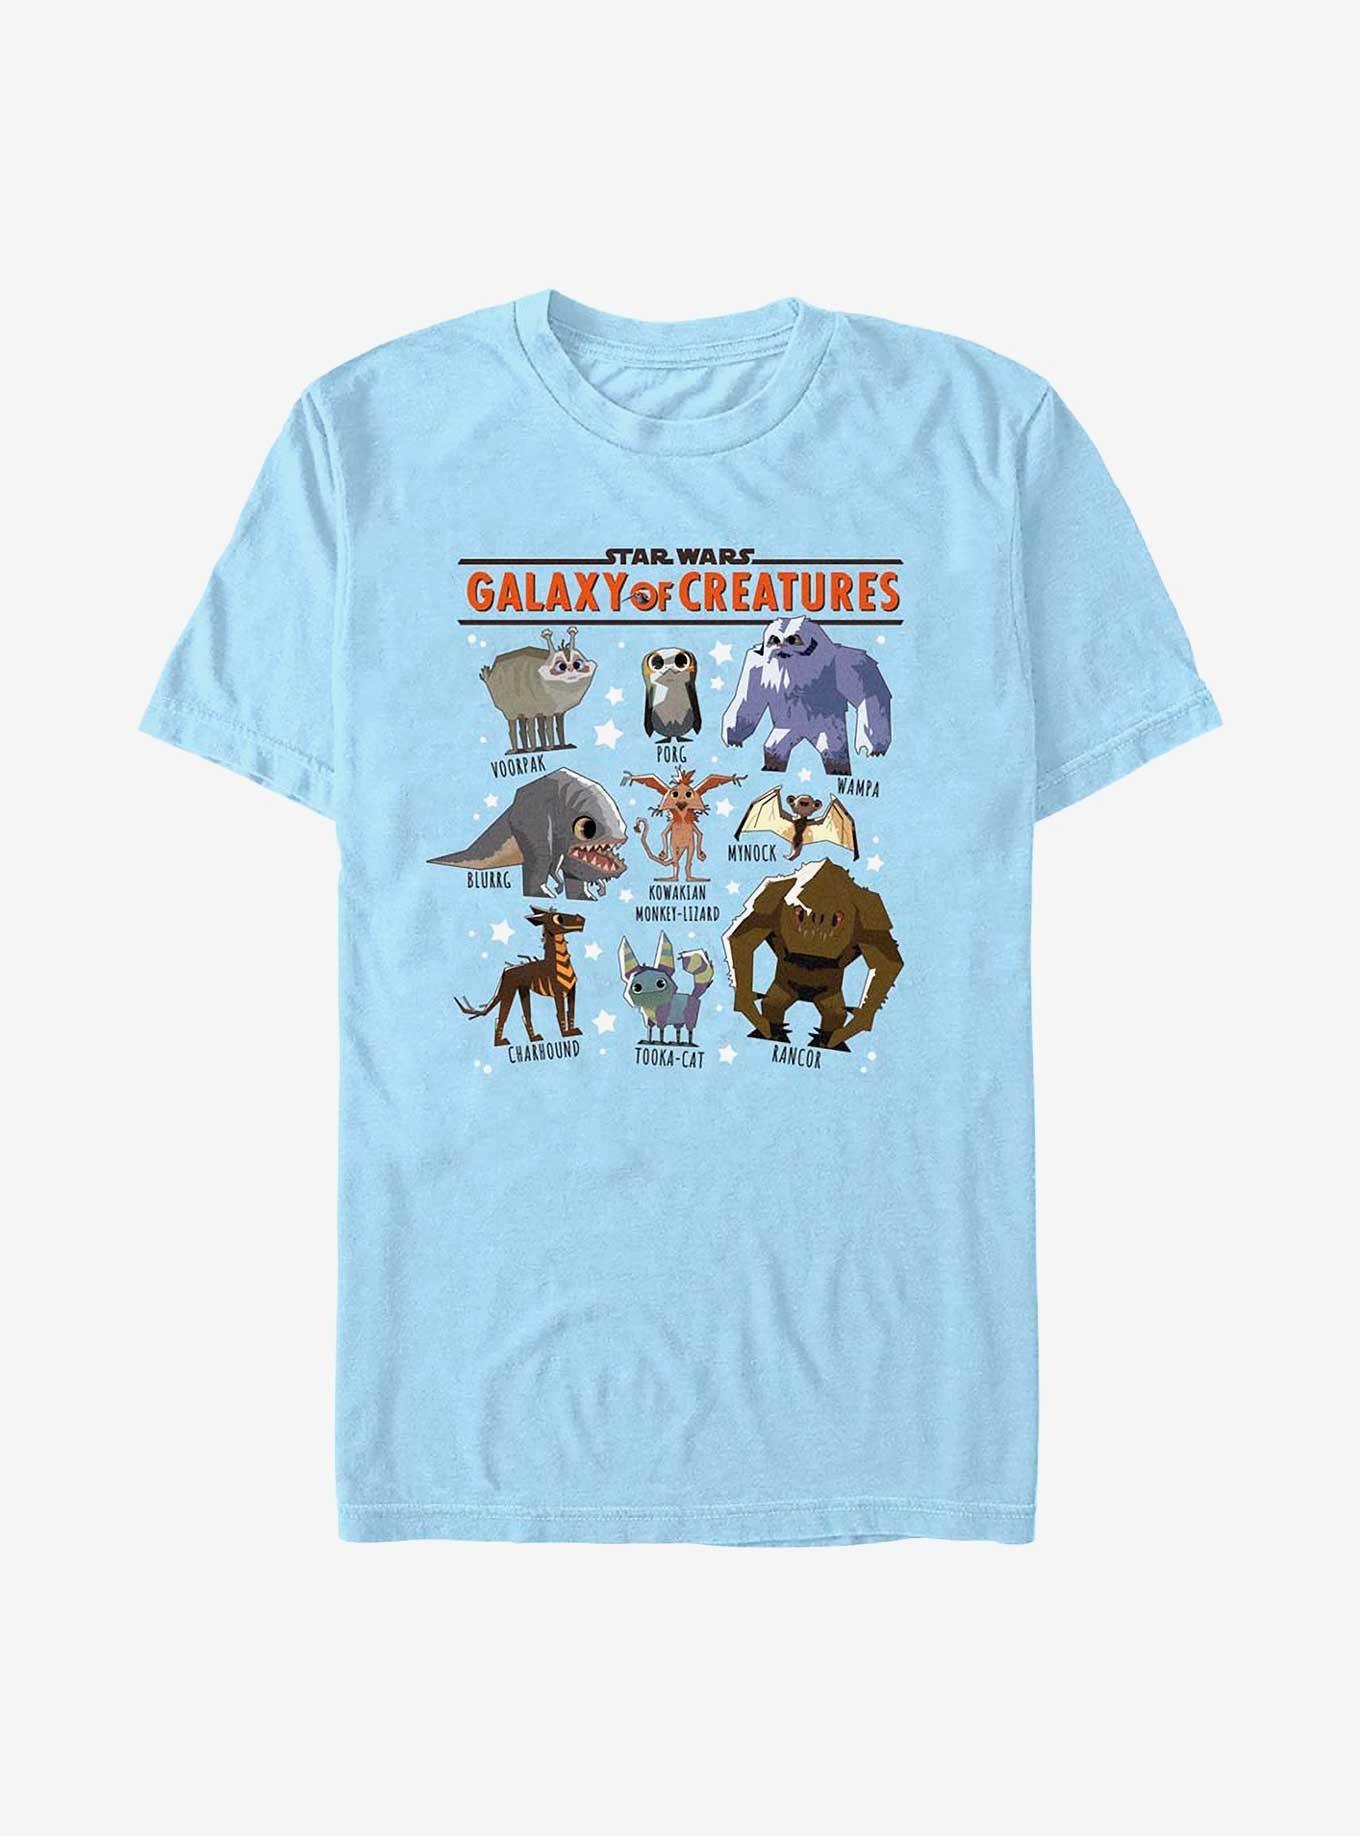 Star Wars: Galaxy Of Creatures Creature Textbook T-Shirt